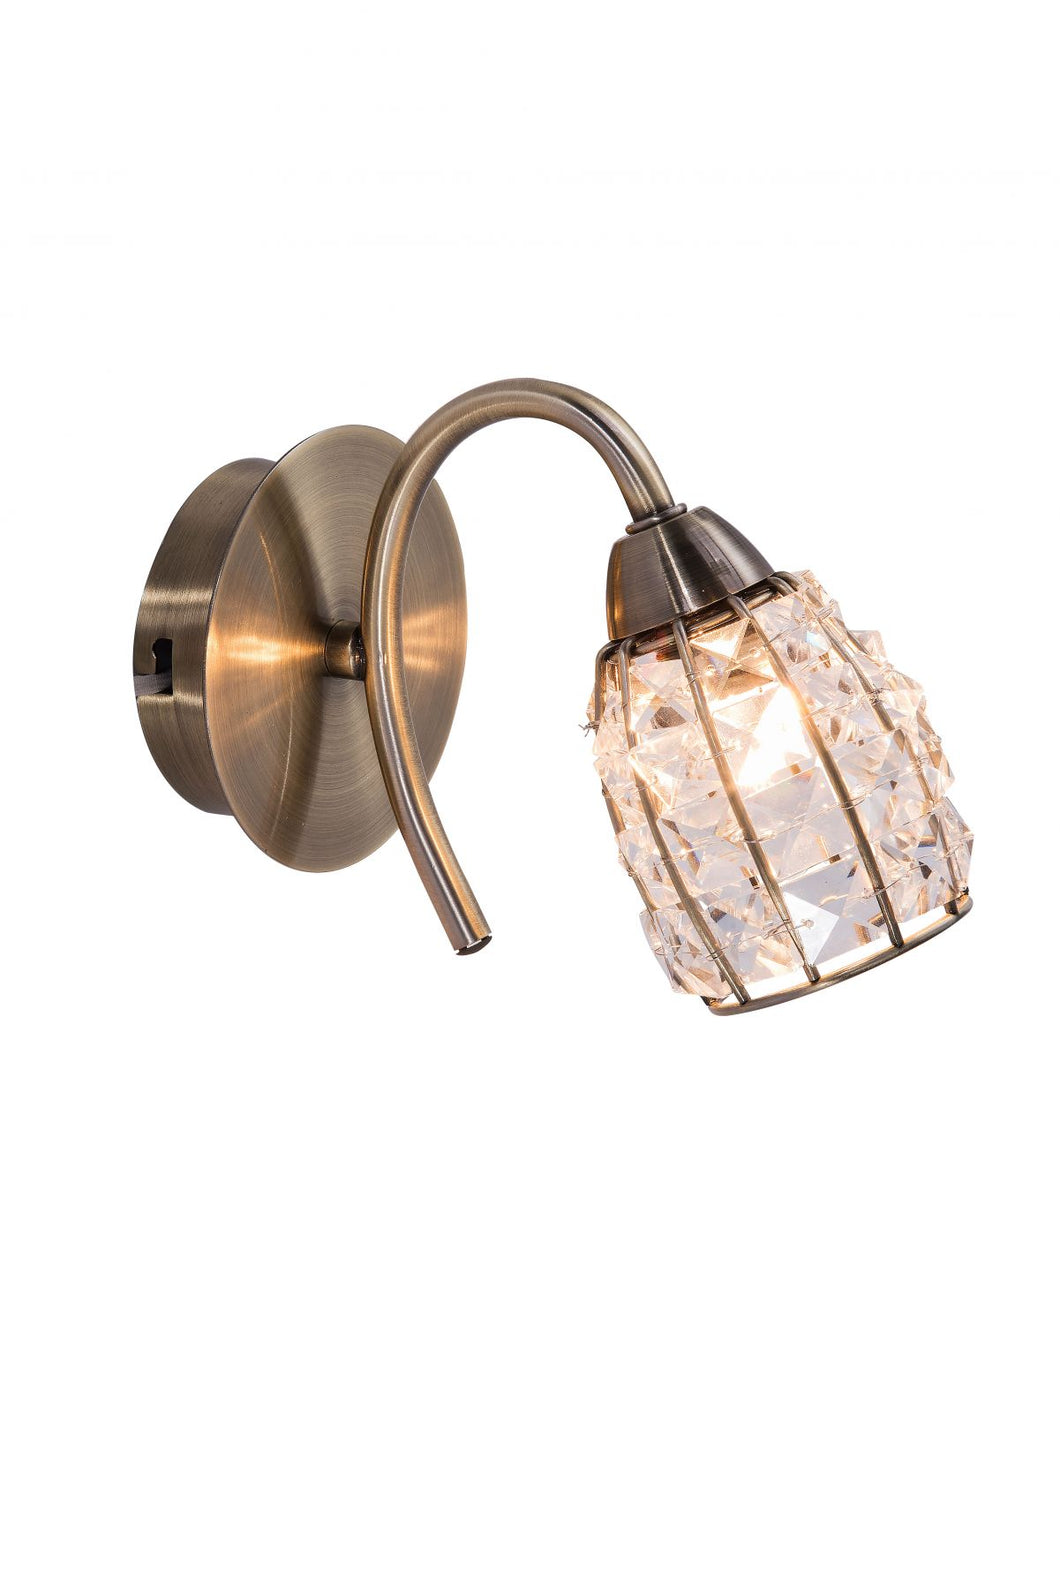 Roma 1 Light Antique Brass Wall Light with Crystal Shade